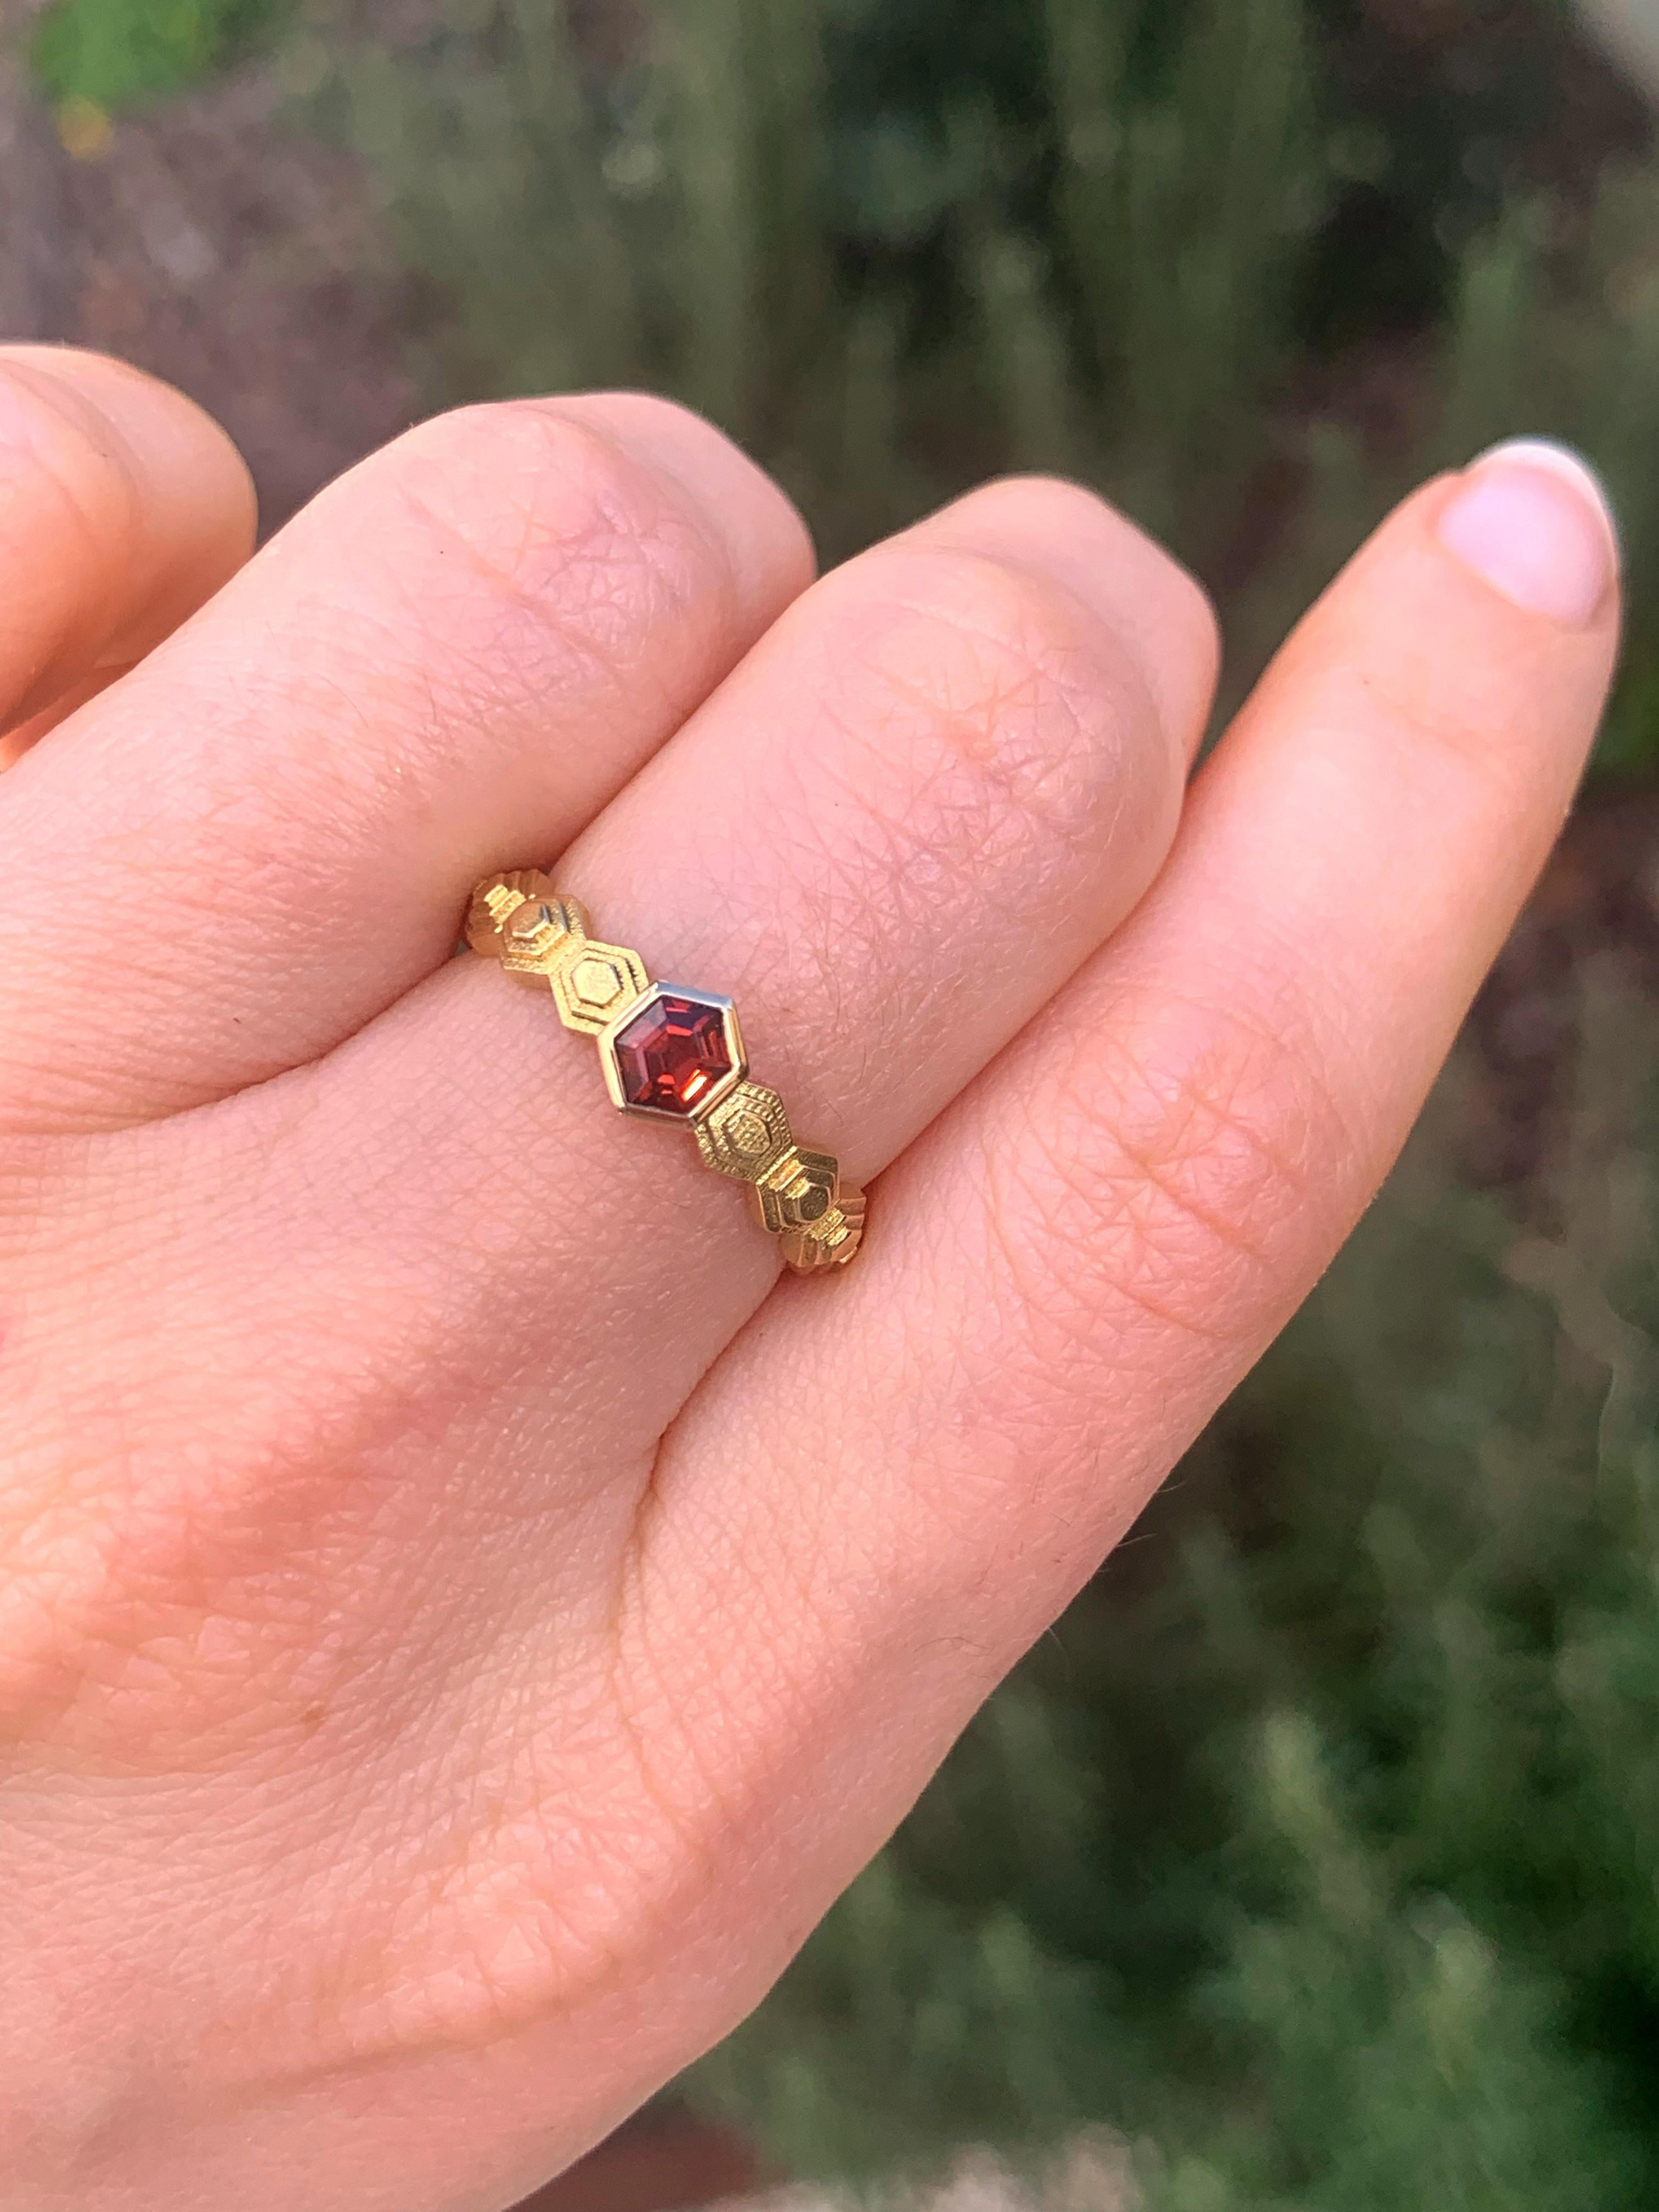 This ring is inspired by the hives made by bees. Indeed, bees are the main type of pollinator in many ecosystems containing flowering plants.

Unfortunately, bees, and other pollinator species, are currently critically endangered, with an extinction